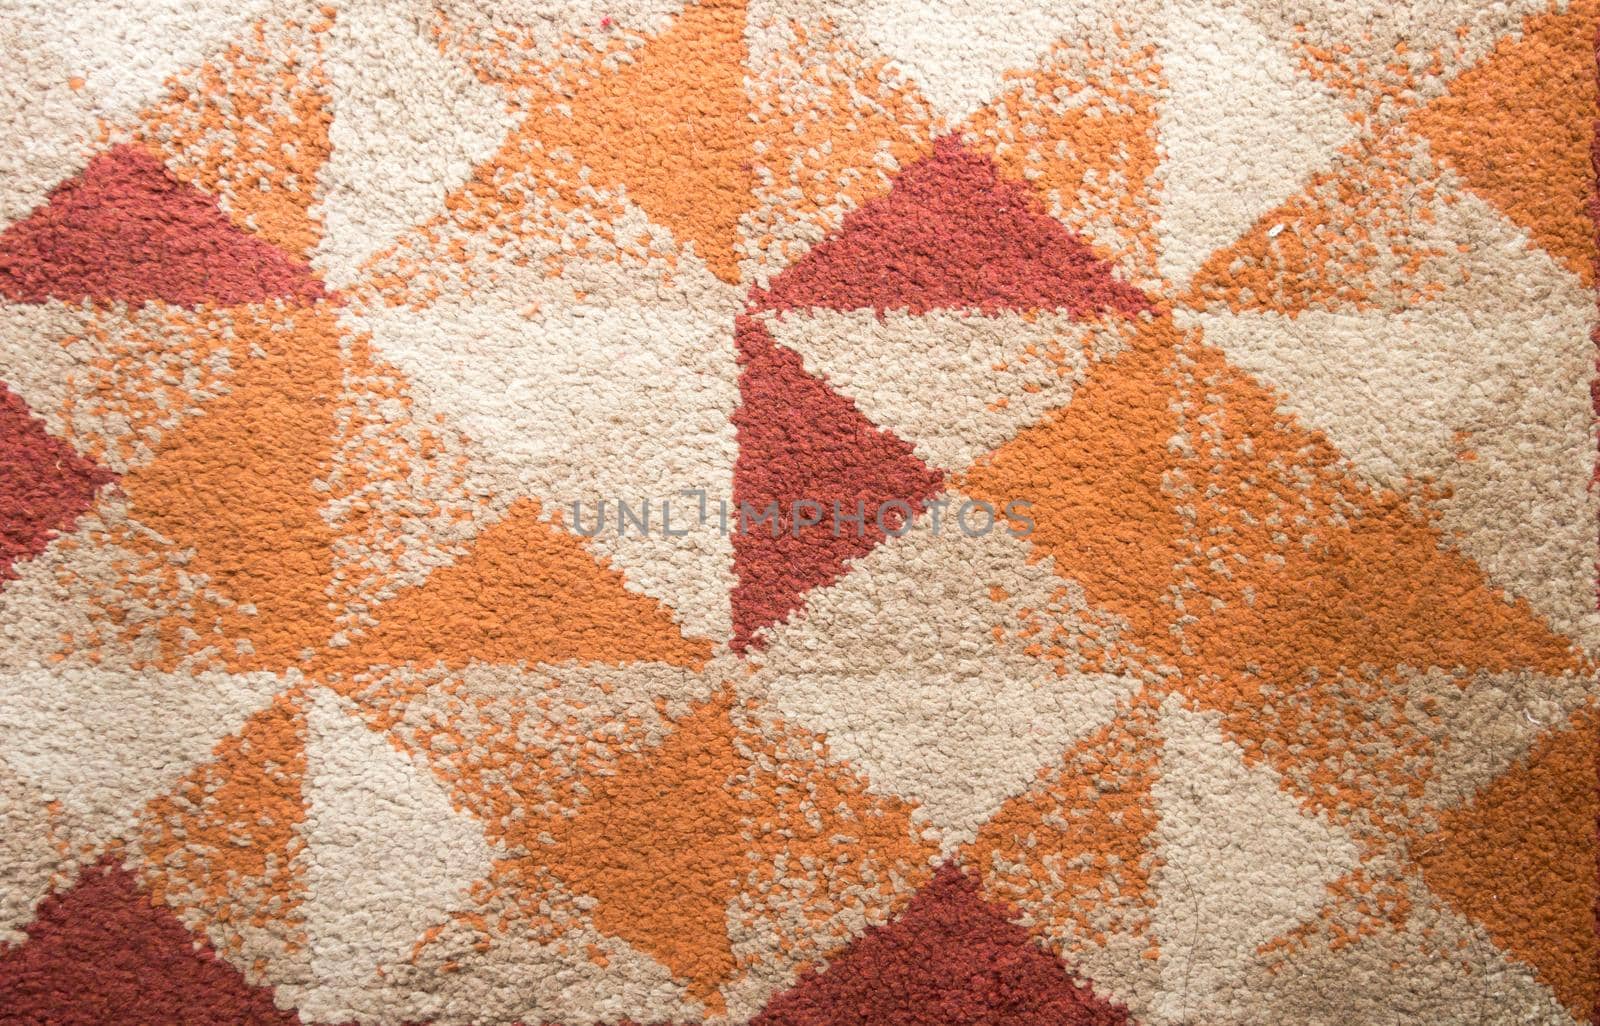 Tongan patterns Wedding motif on Tapa carpet cloth Abstracts backgrounds. Tapa cloth usually form a grid of squares each of which contains geometric patterns with repeated motifs. by sudiptabhowmick